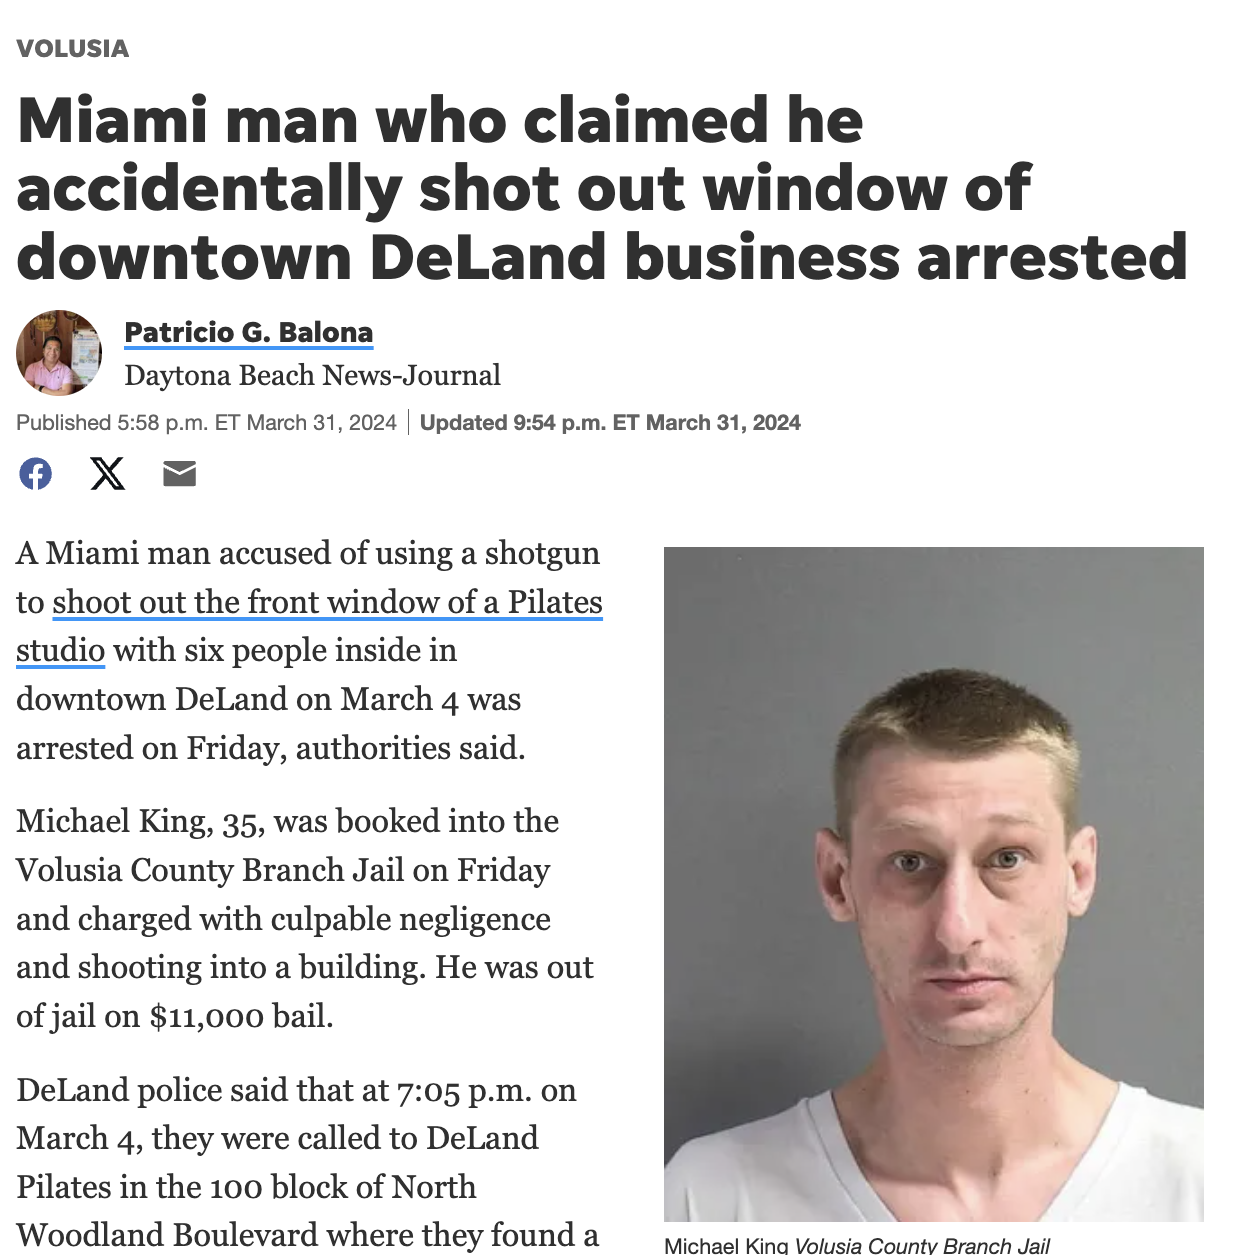 buzz cut - Volusia Miami man who claimed he accidentally shot out window of downtown DeLand business arrested Patricio G. Balona Daytona Beach NewsJournal Published p.m. Et | Updated p.m. Et X A Miami man accused of using a shotgun to shoot out the front 